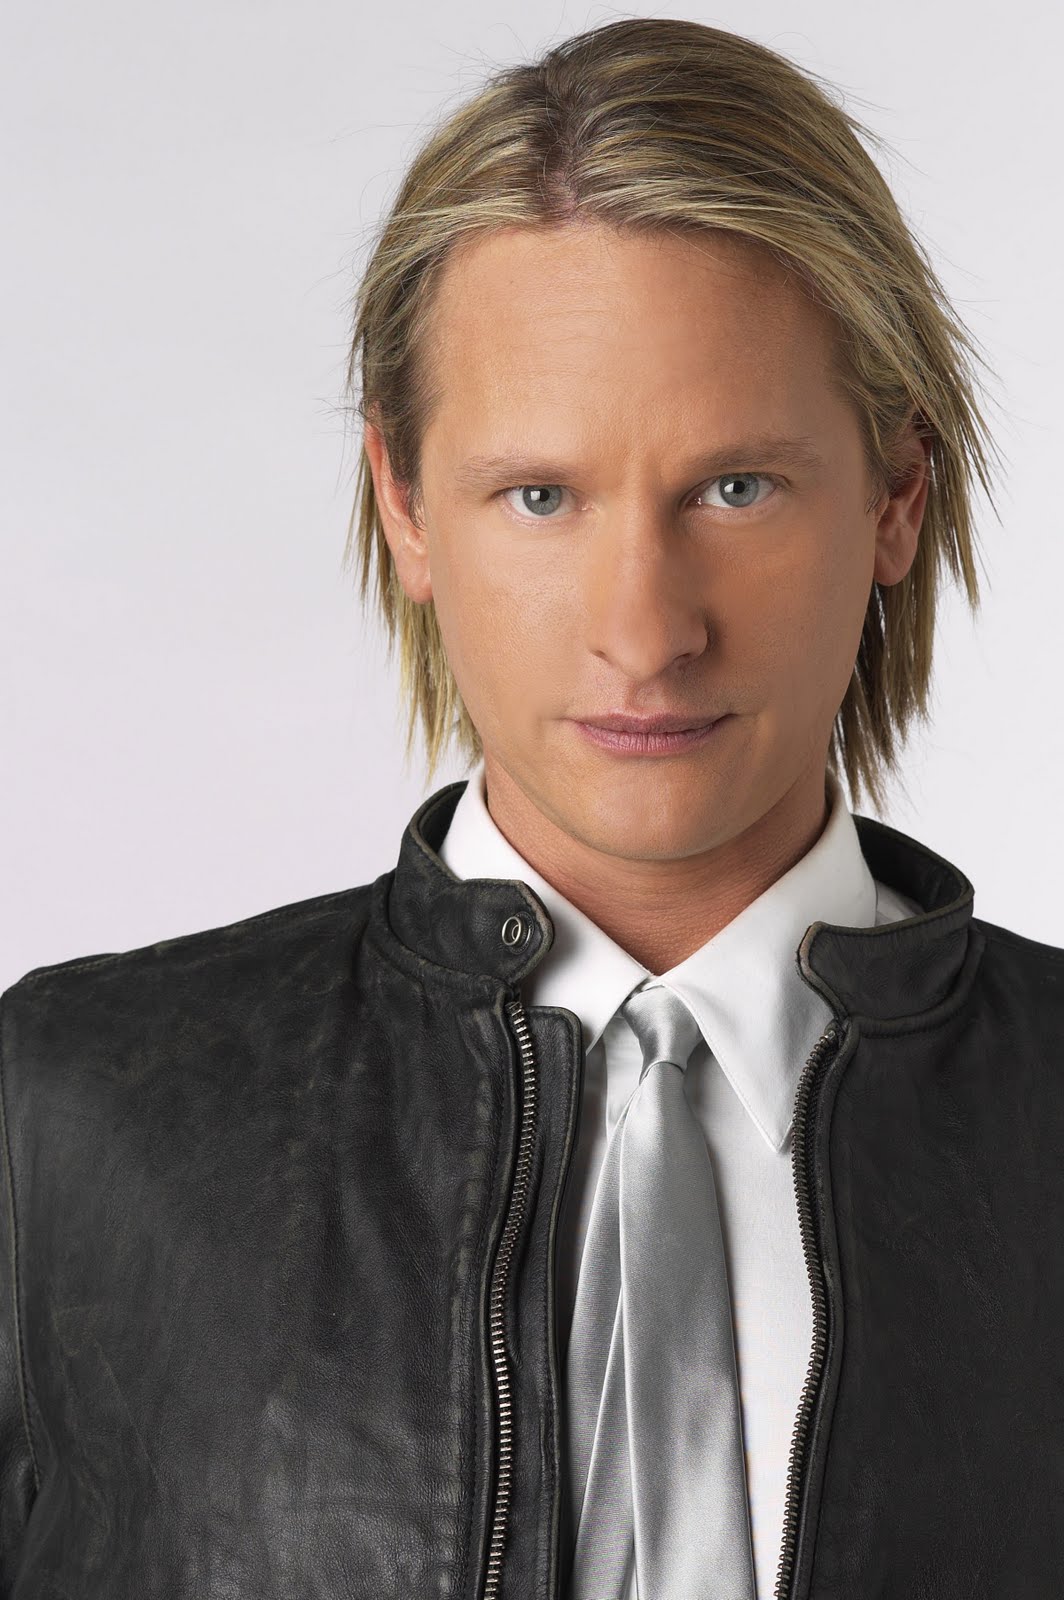 Pictures of Carson Kressley, Picture #291394 - Pictures Of C